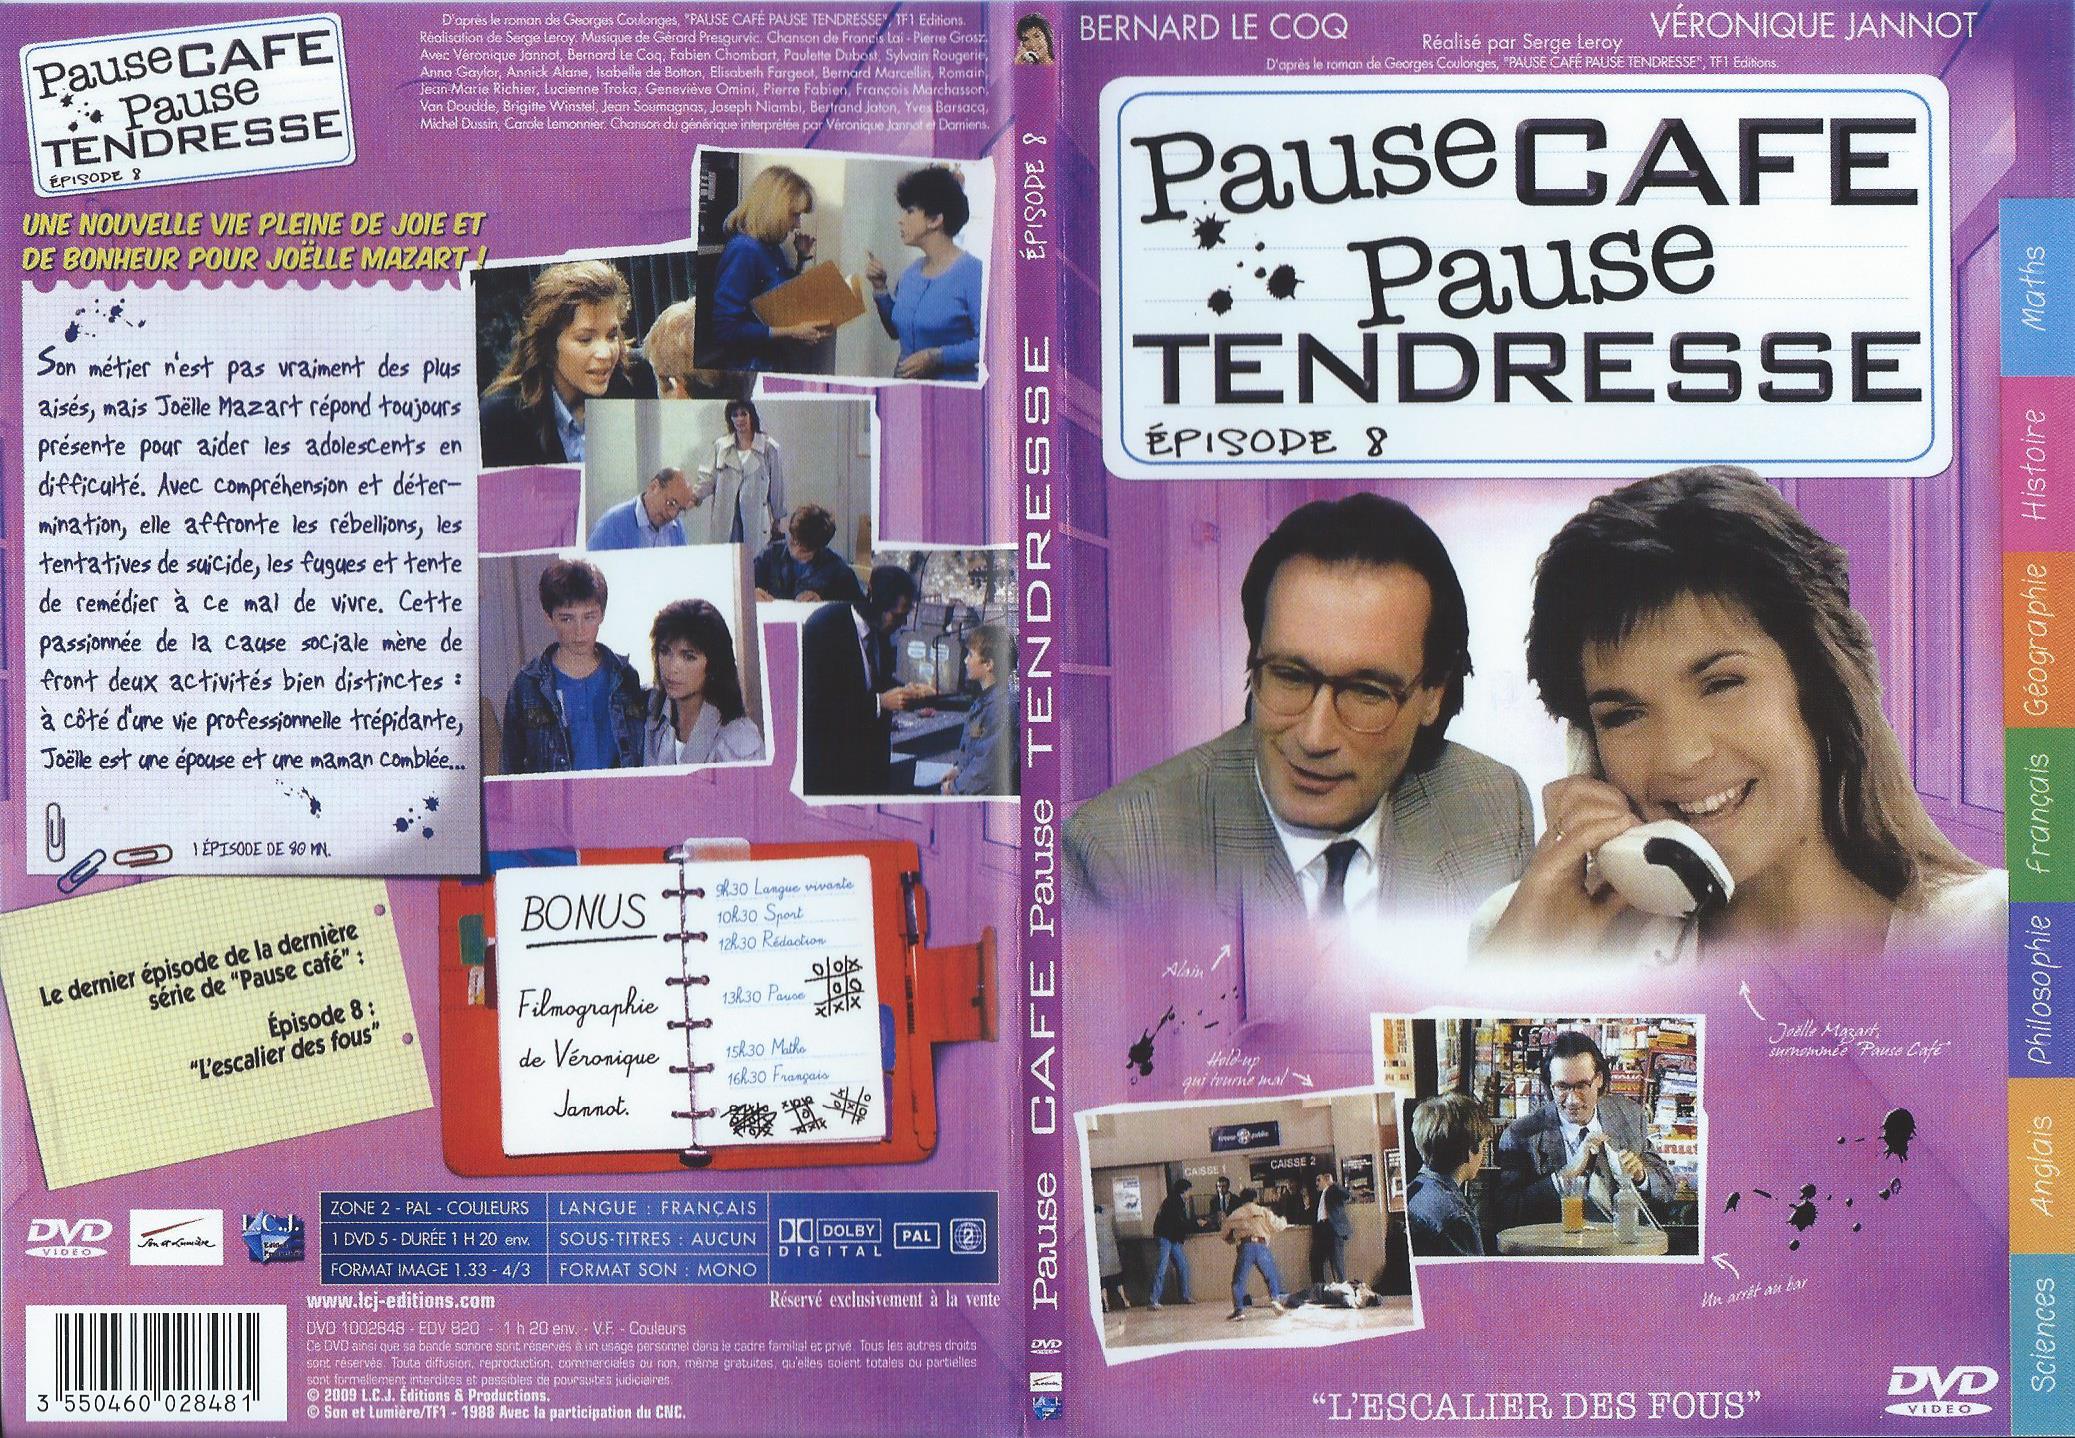 Jaquette DVD Pause Caf, Pause Tendresse DVD 8